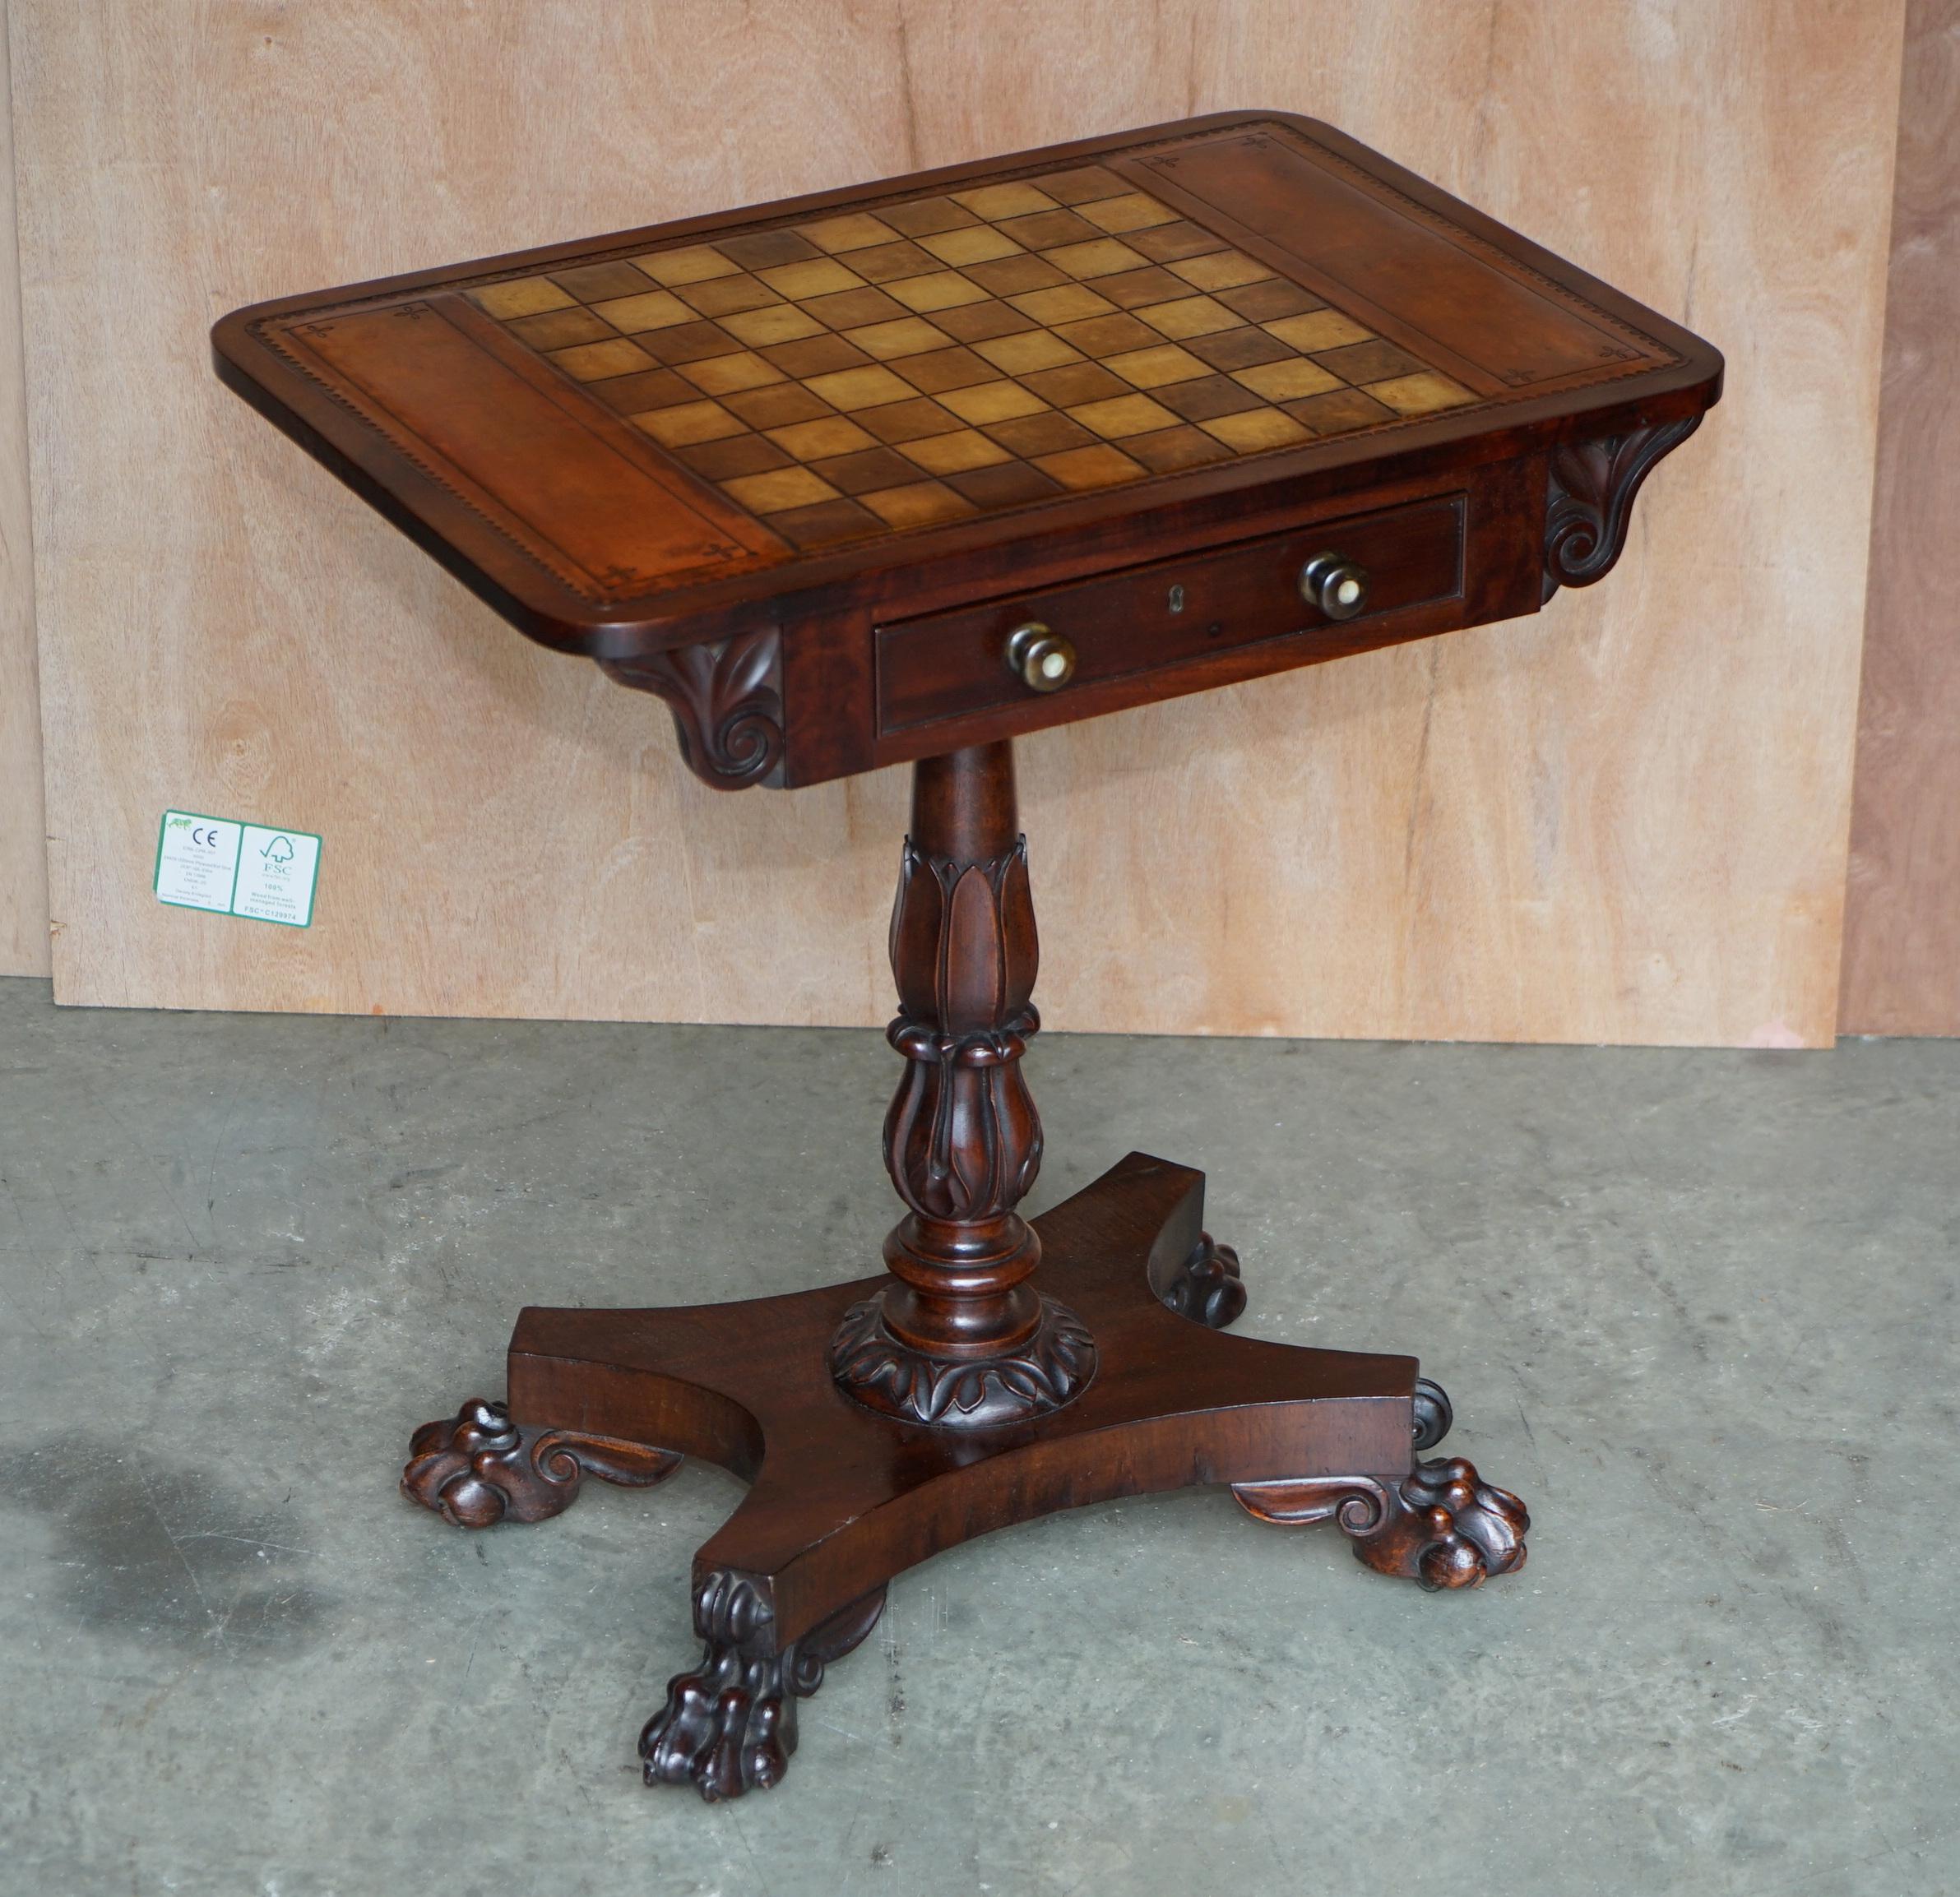 We are delighted to offer this restored exquisite hand made in England William IV circa 1830 mahogany occasional table with brown leather chessboard top.

A very rare example, I have never seen this table in Mahogany before and never with the